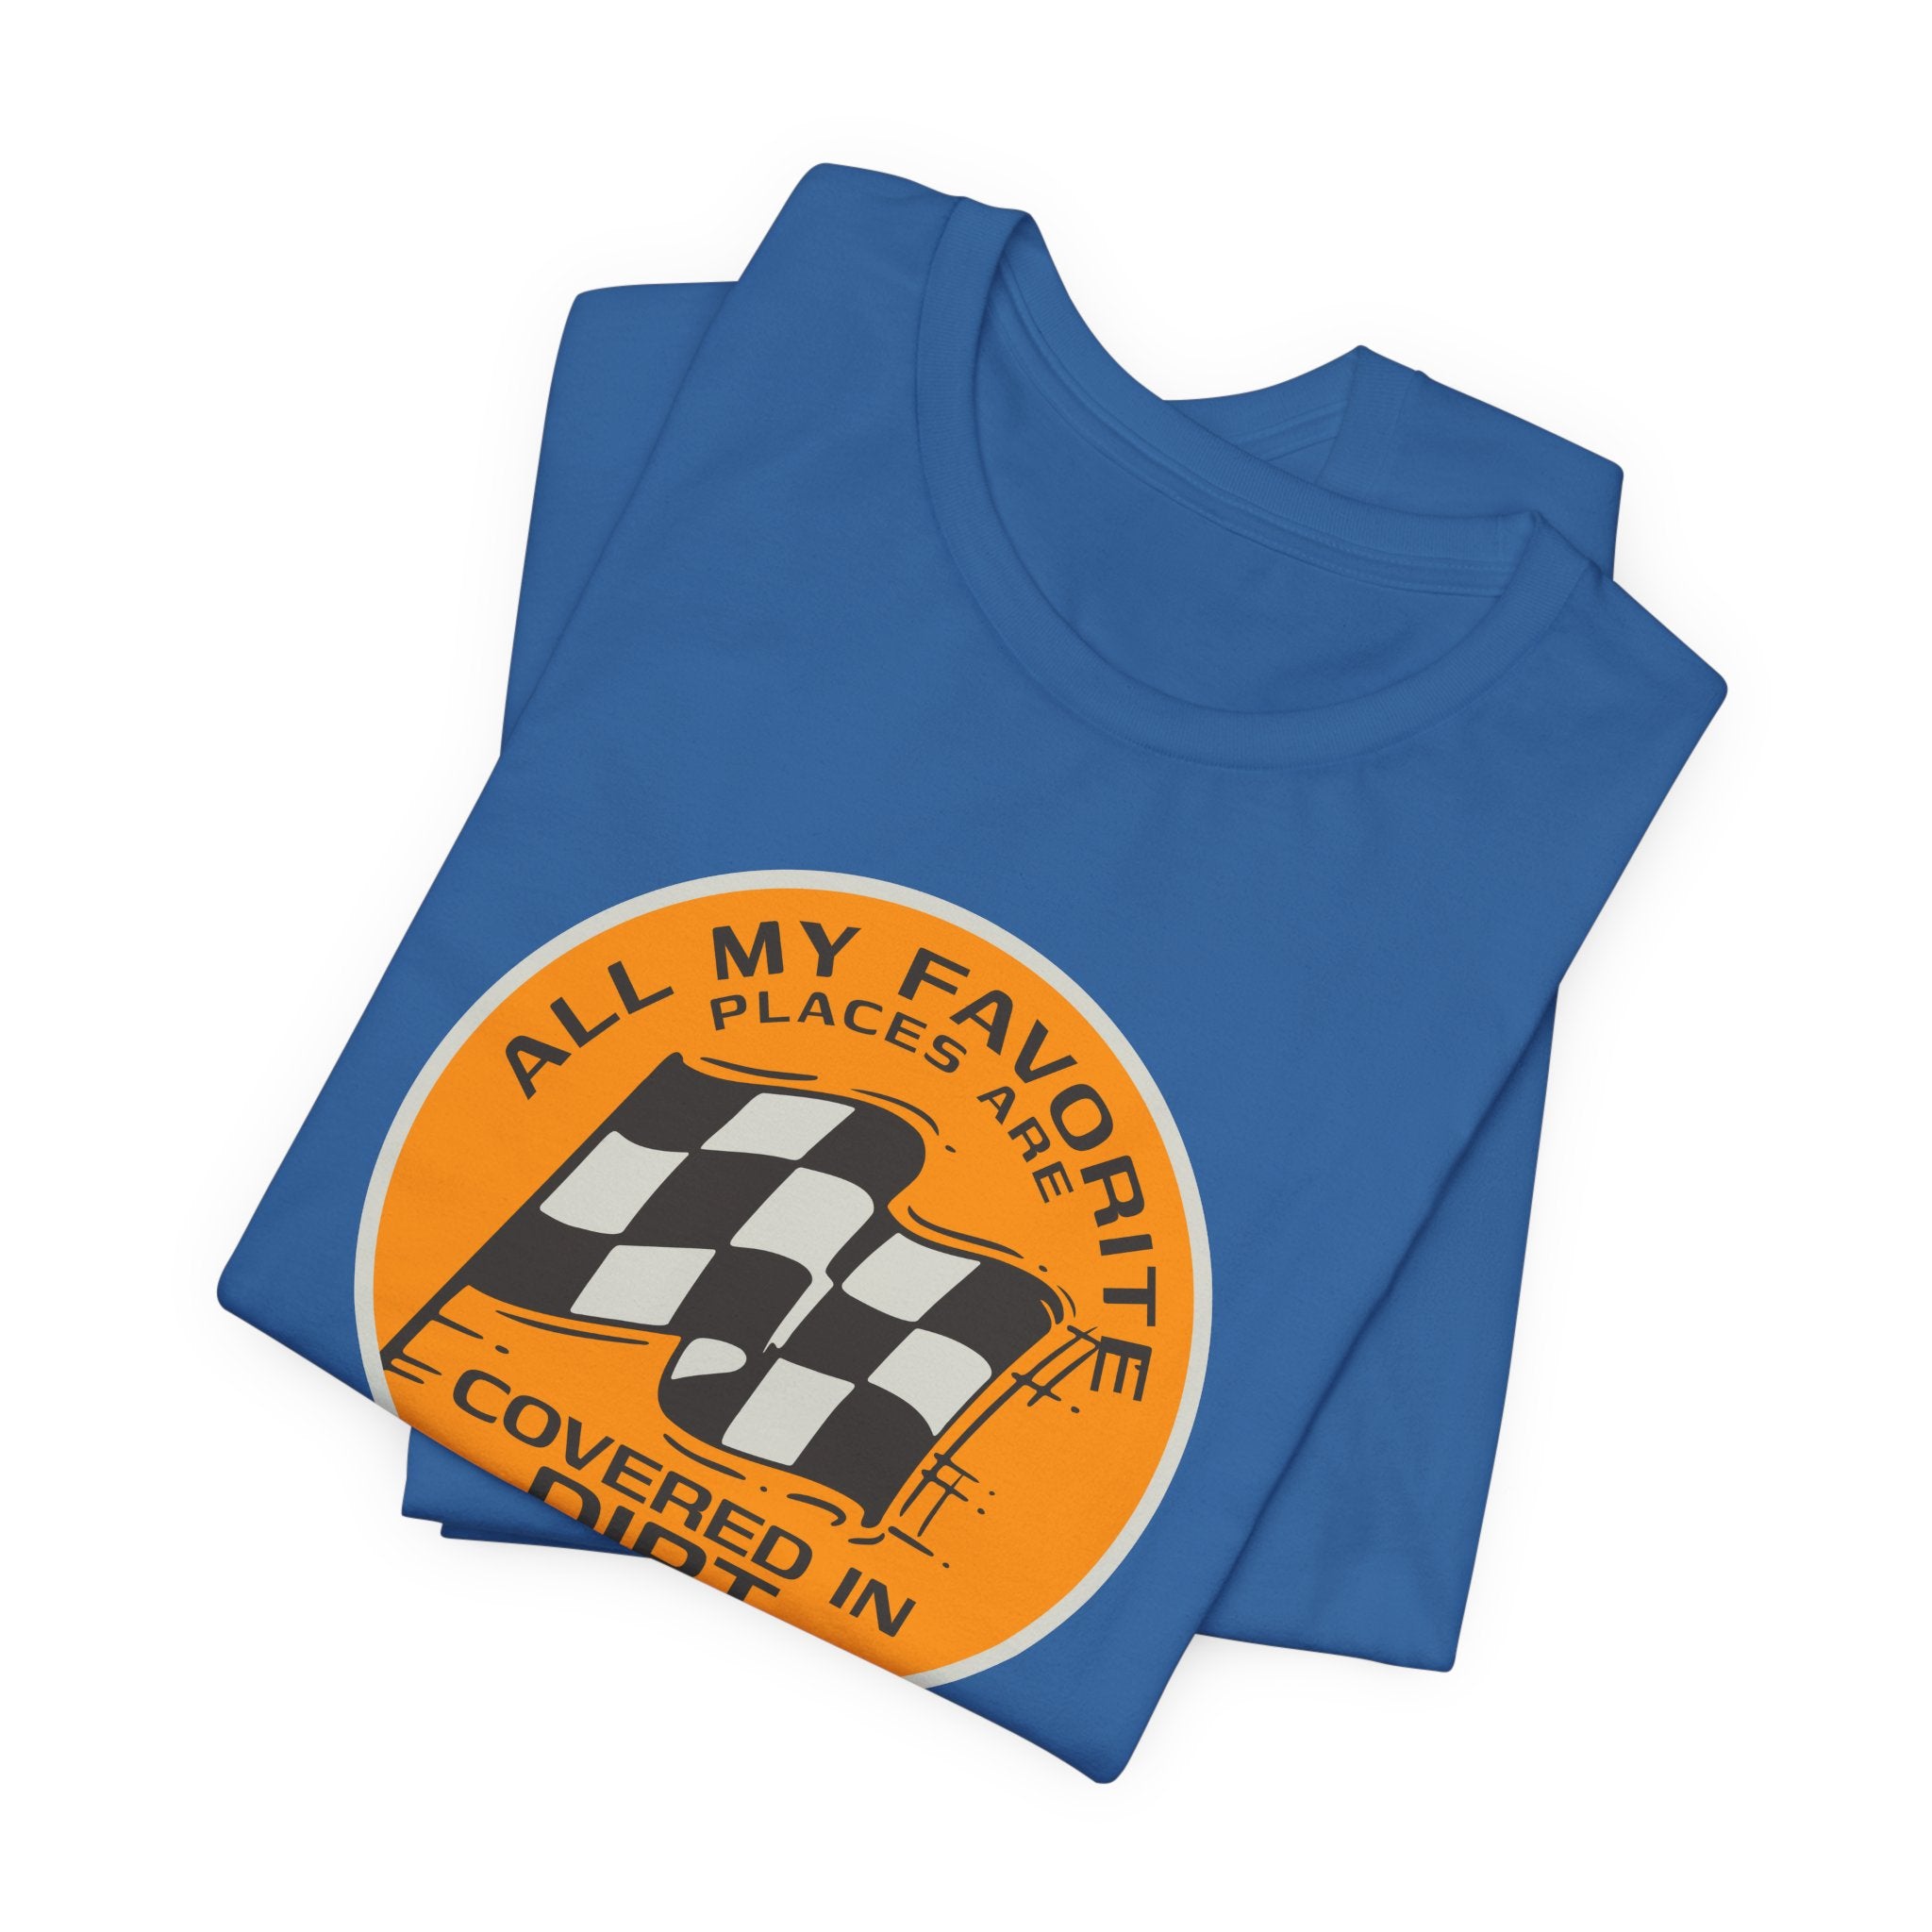 All My Favorite Places are Covered in Dirt Raceday Graphic T-Shirt for Women